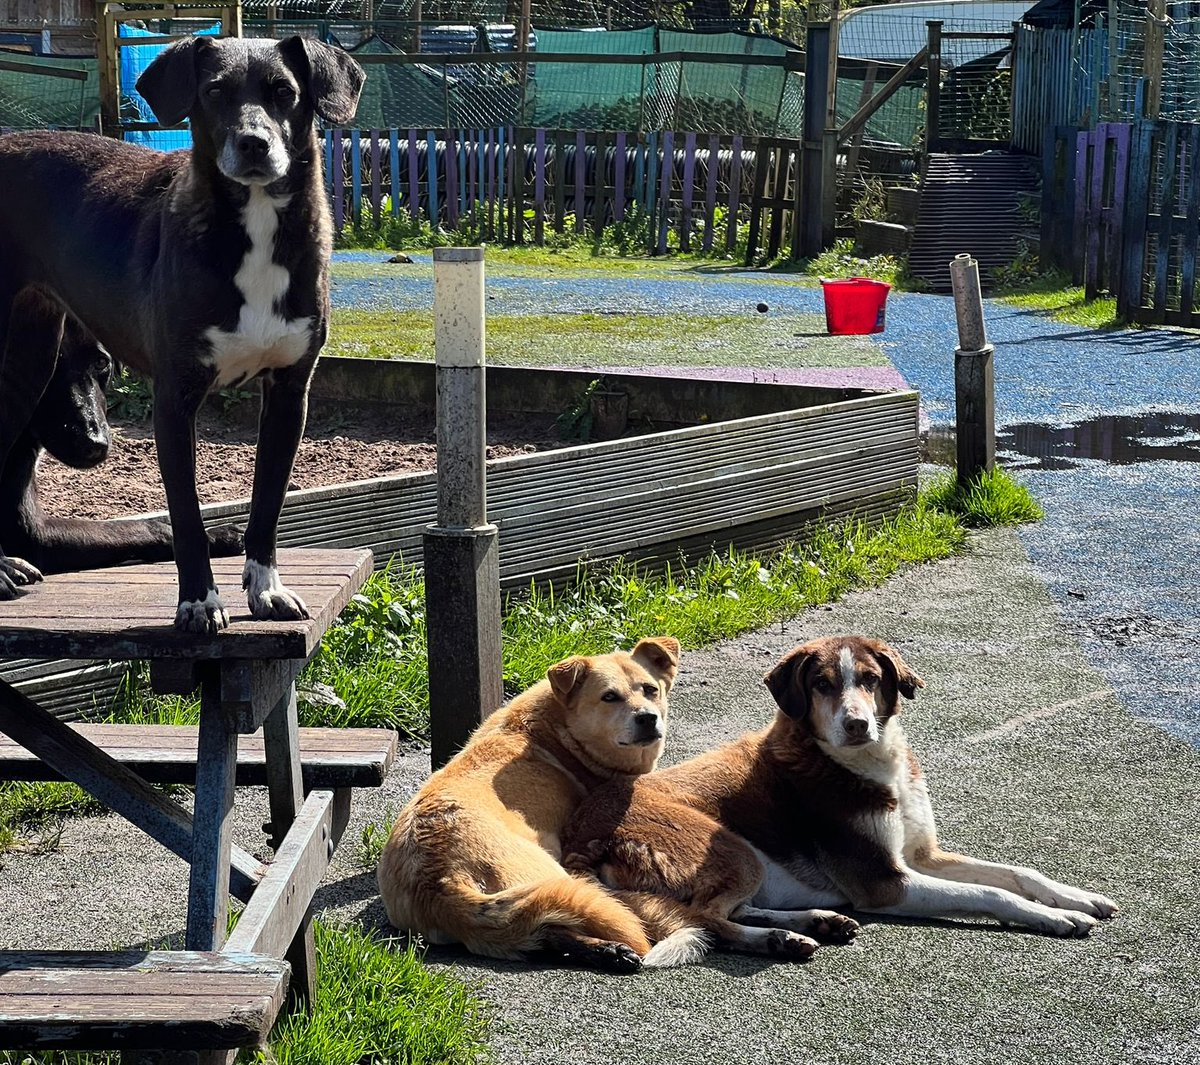 Inca, Alice and her new boyfriend Peanut catching some rays 🌞 Love is definitely in the air 💜